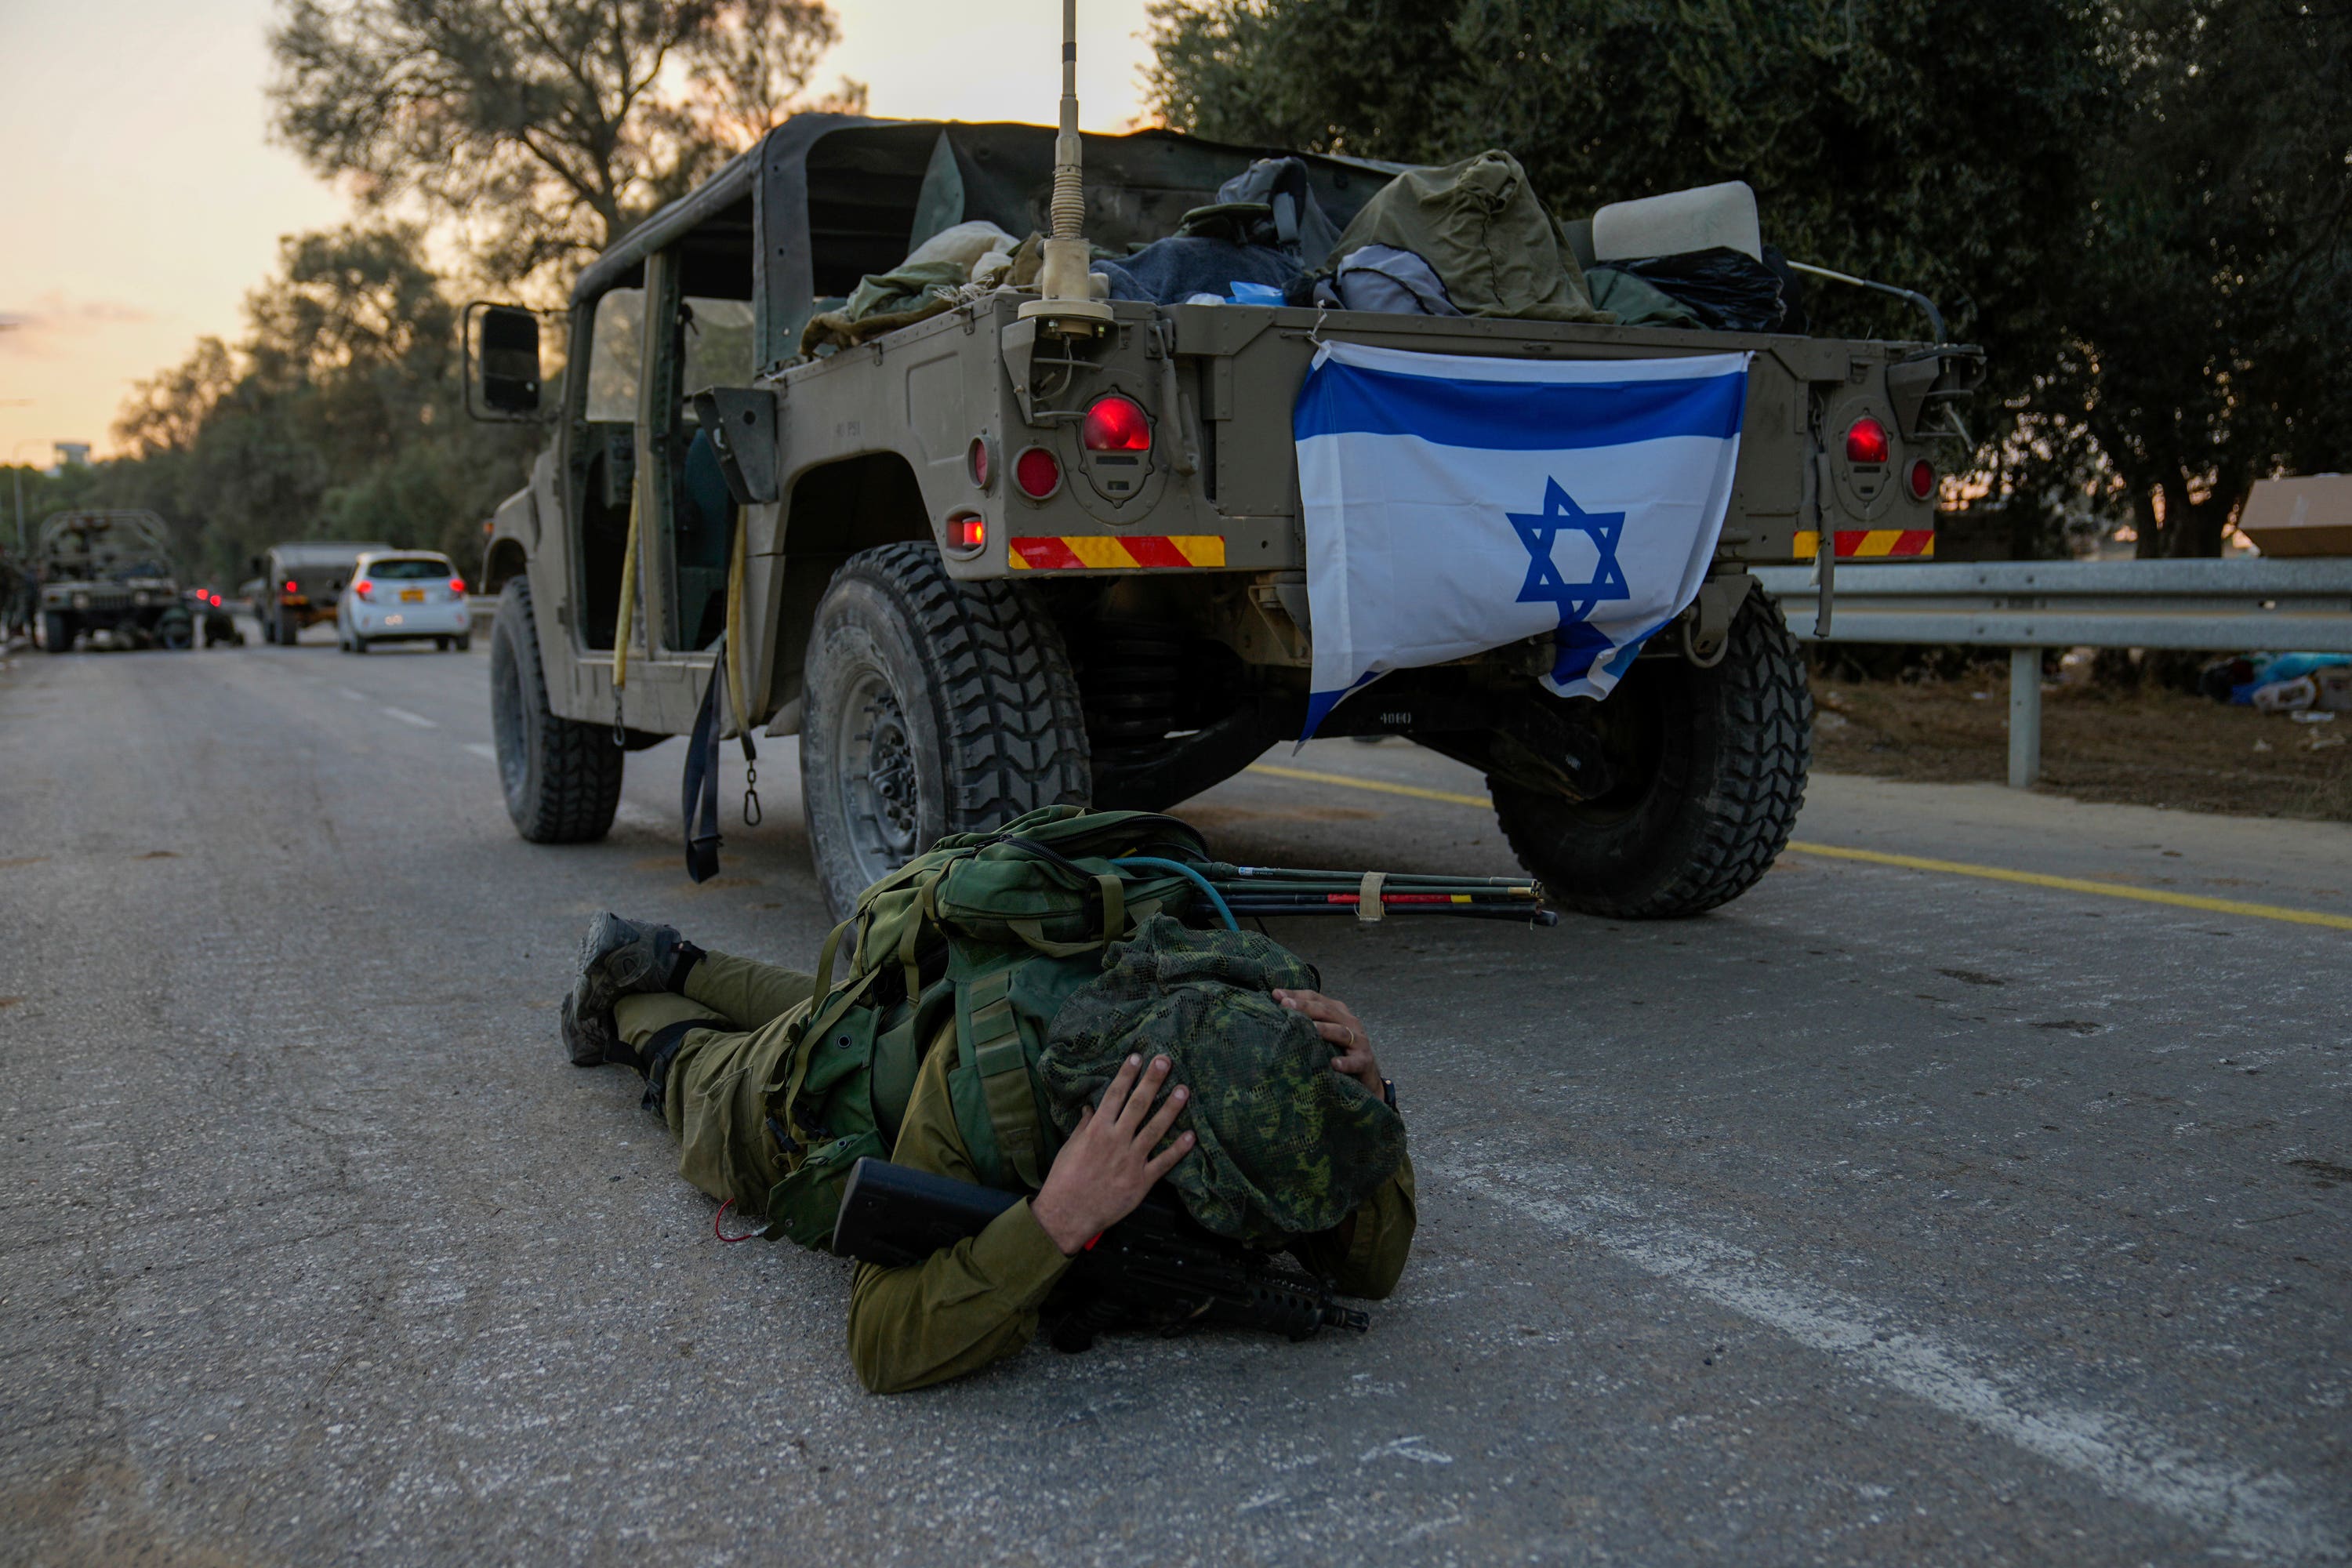 Israeli soldiers take cover on the ground. Over five days, Hamas has fired thousands of rockets into Israel.